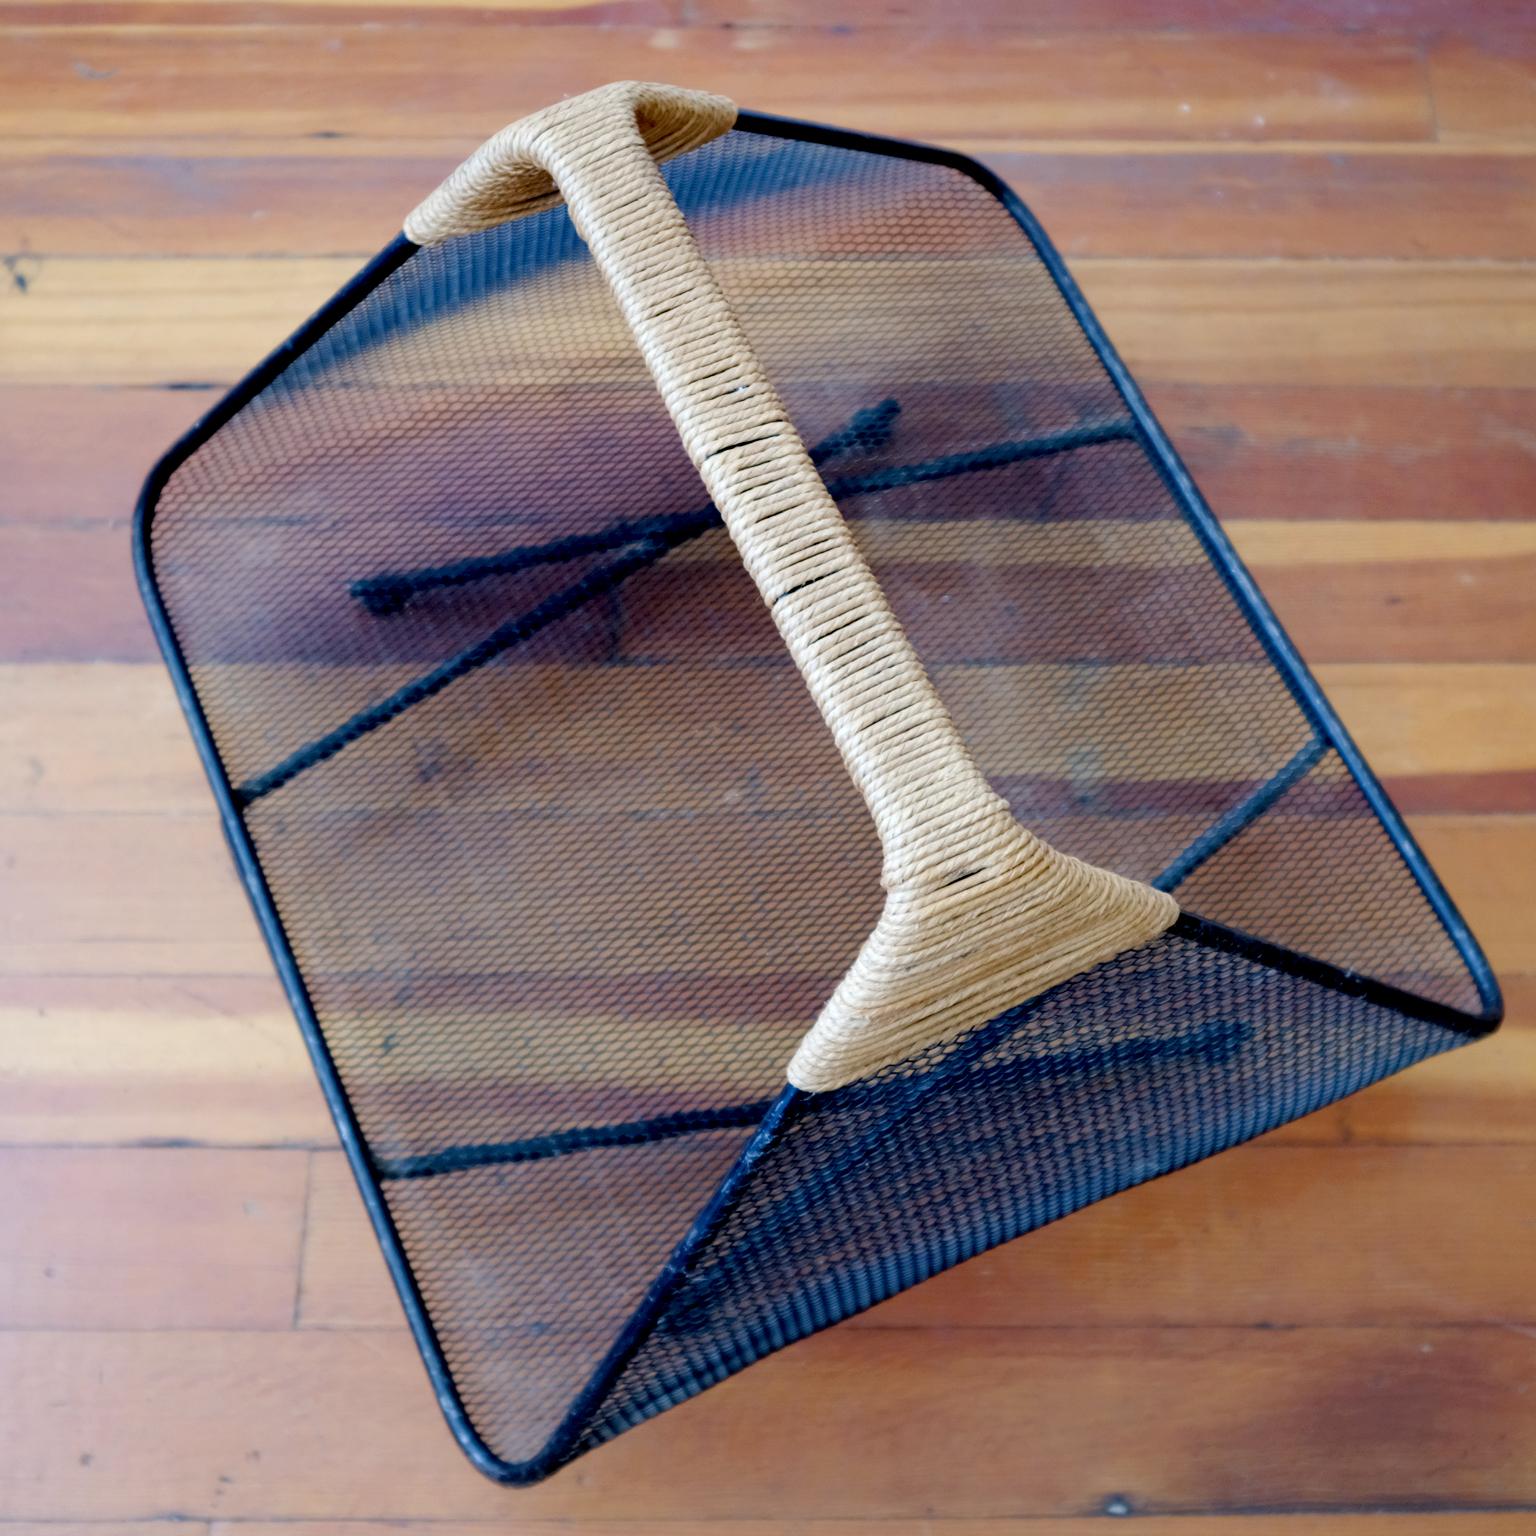 Mid-20th Century Magazine Rack or Log Holder by Tony Paul for Woodlin-Hall